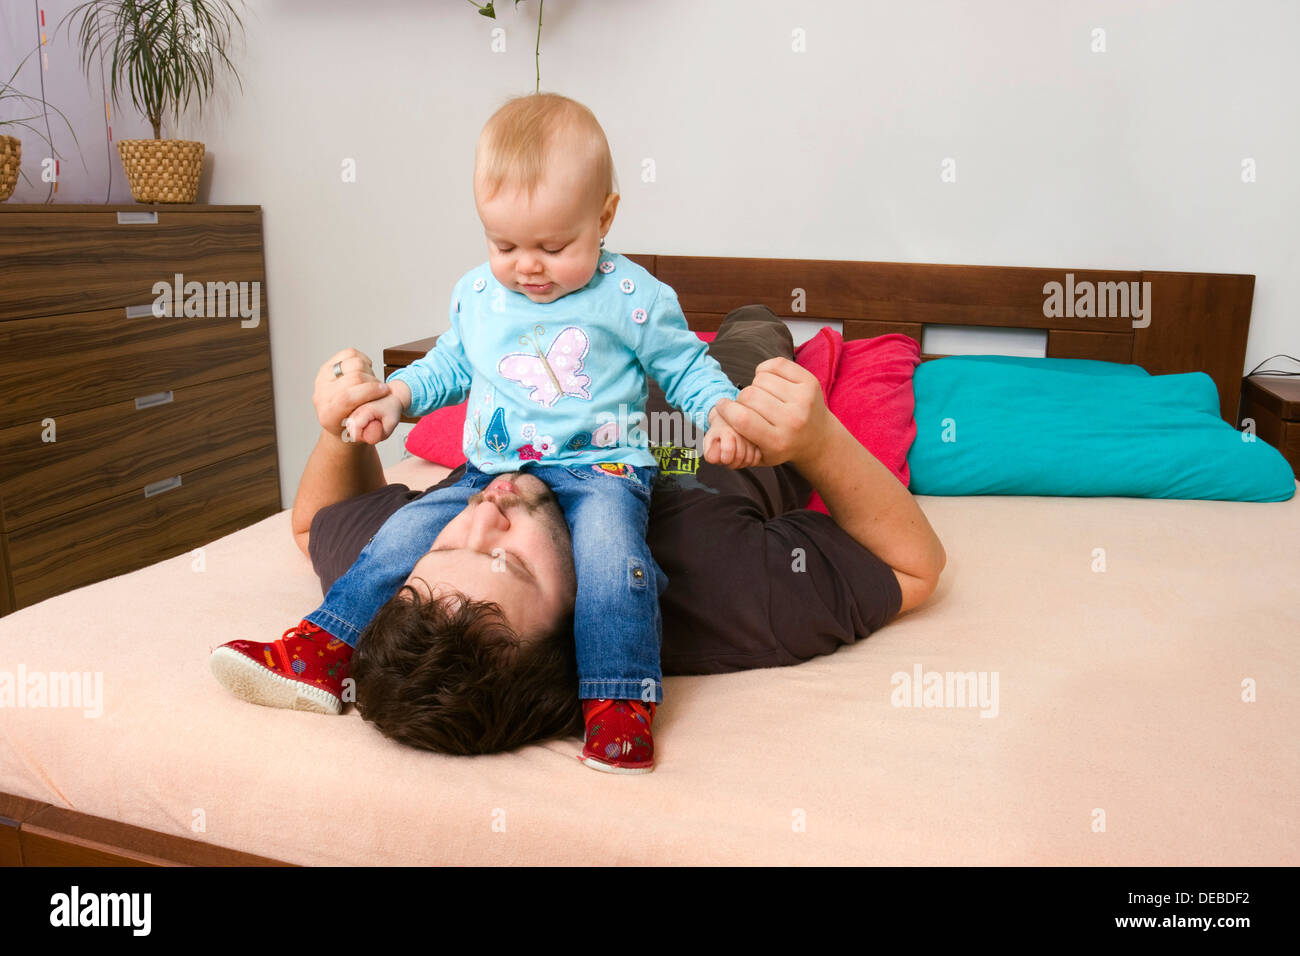 Father, 32 years, playing with baby, 1 year Stock Photo